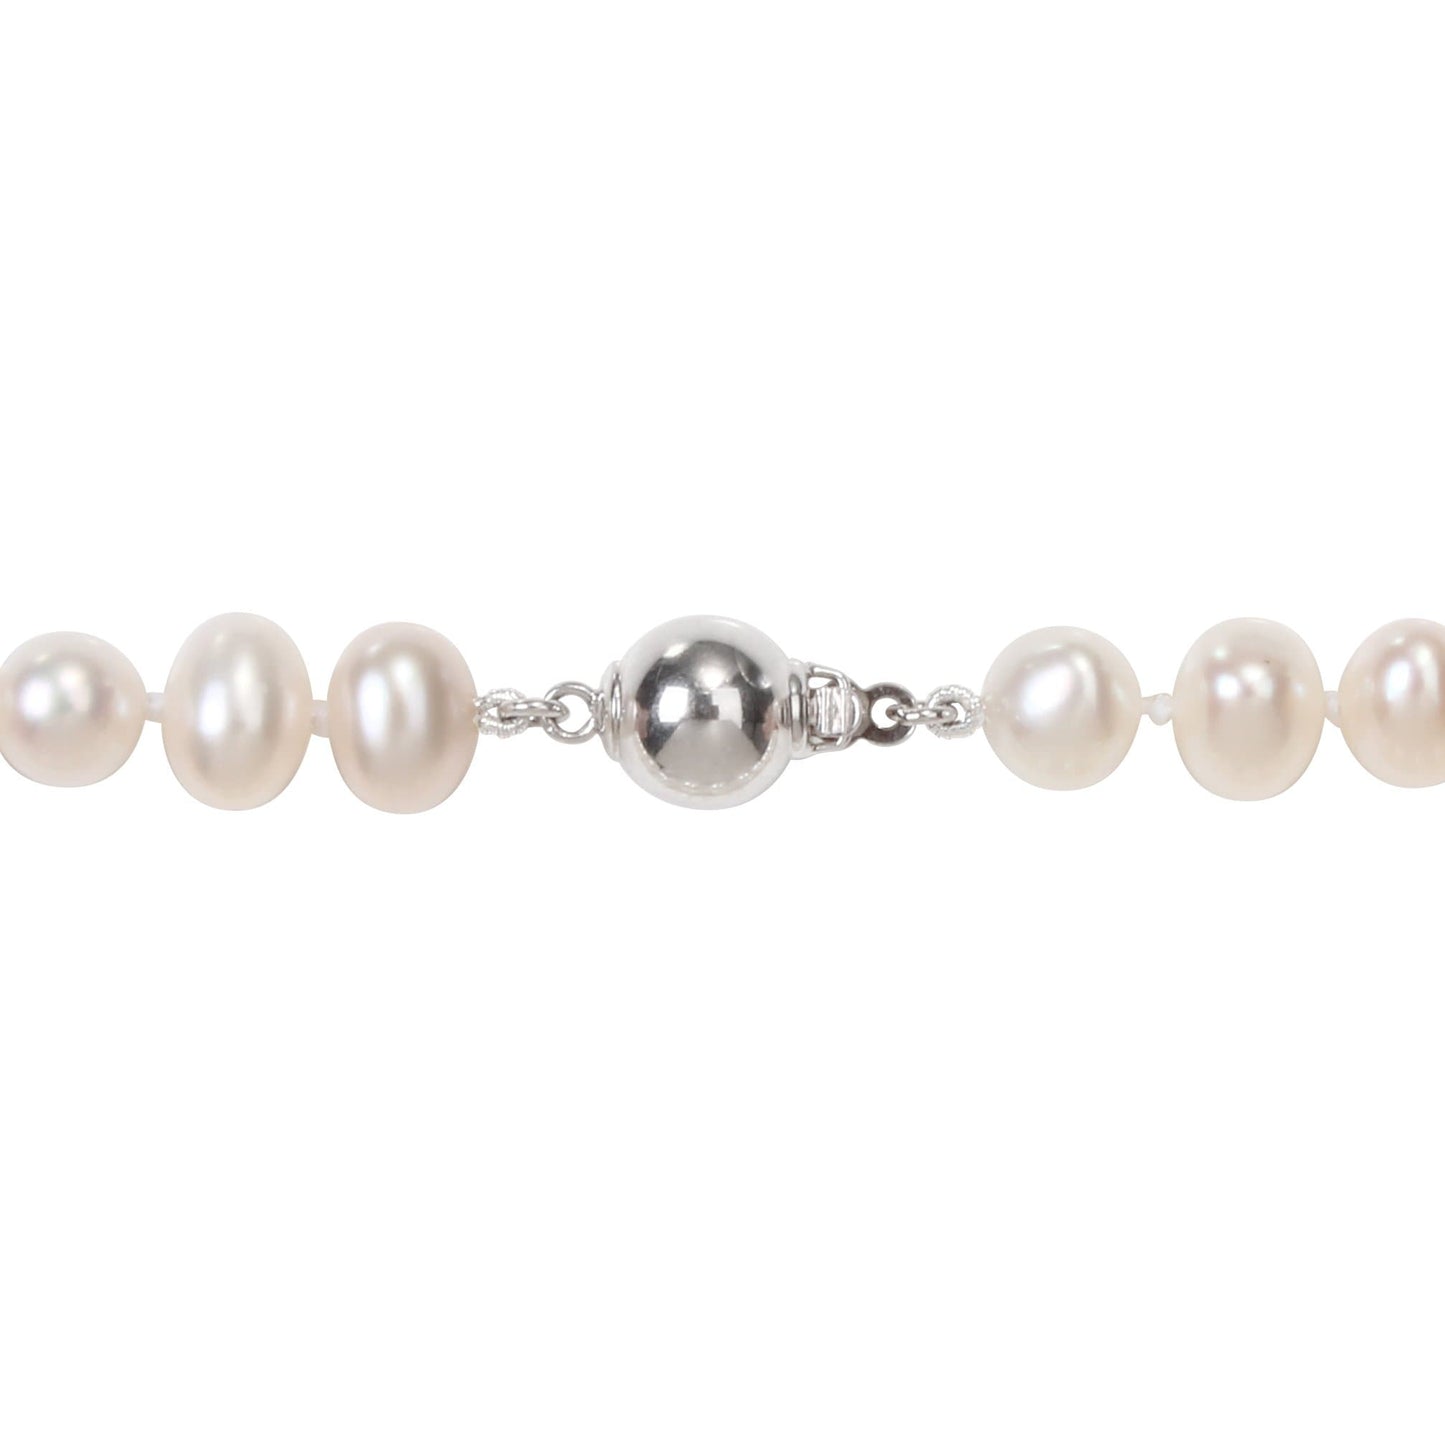 20 Freshwater Pearl Necklace